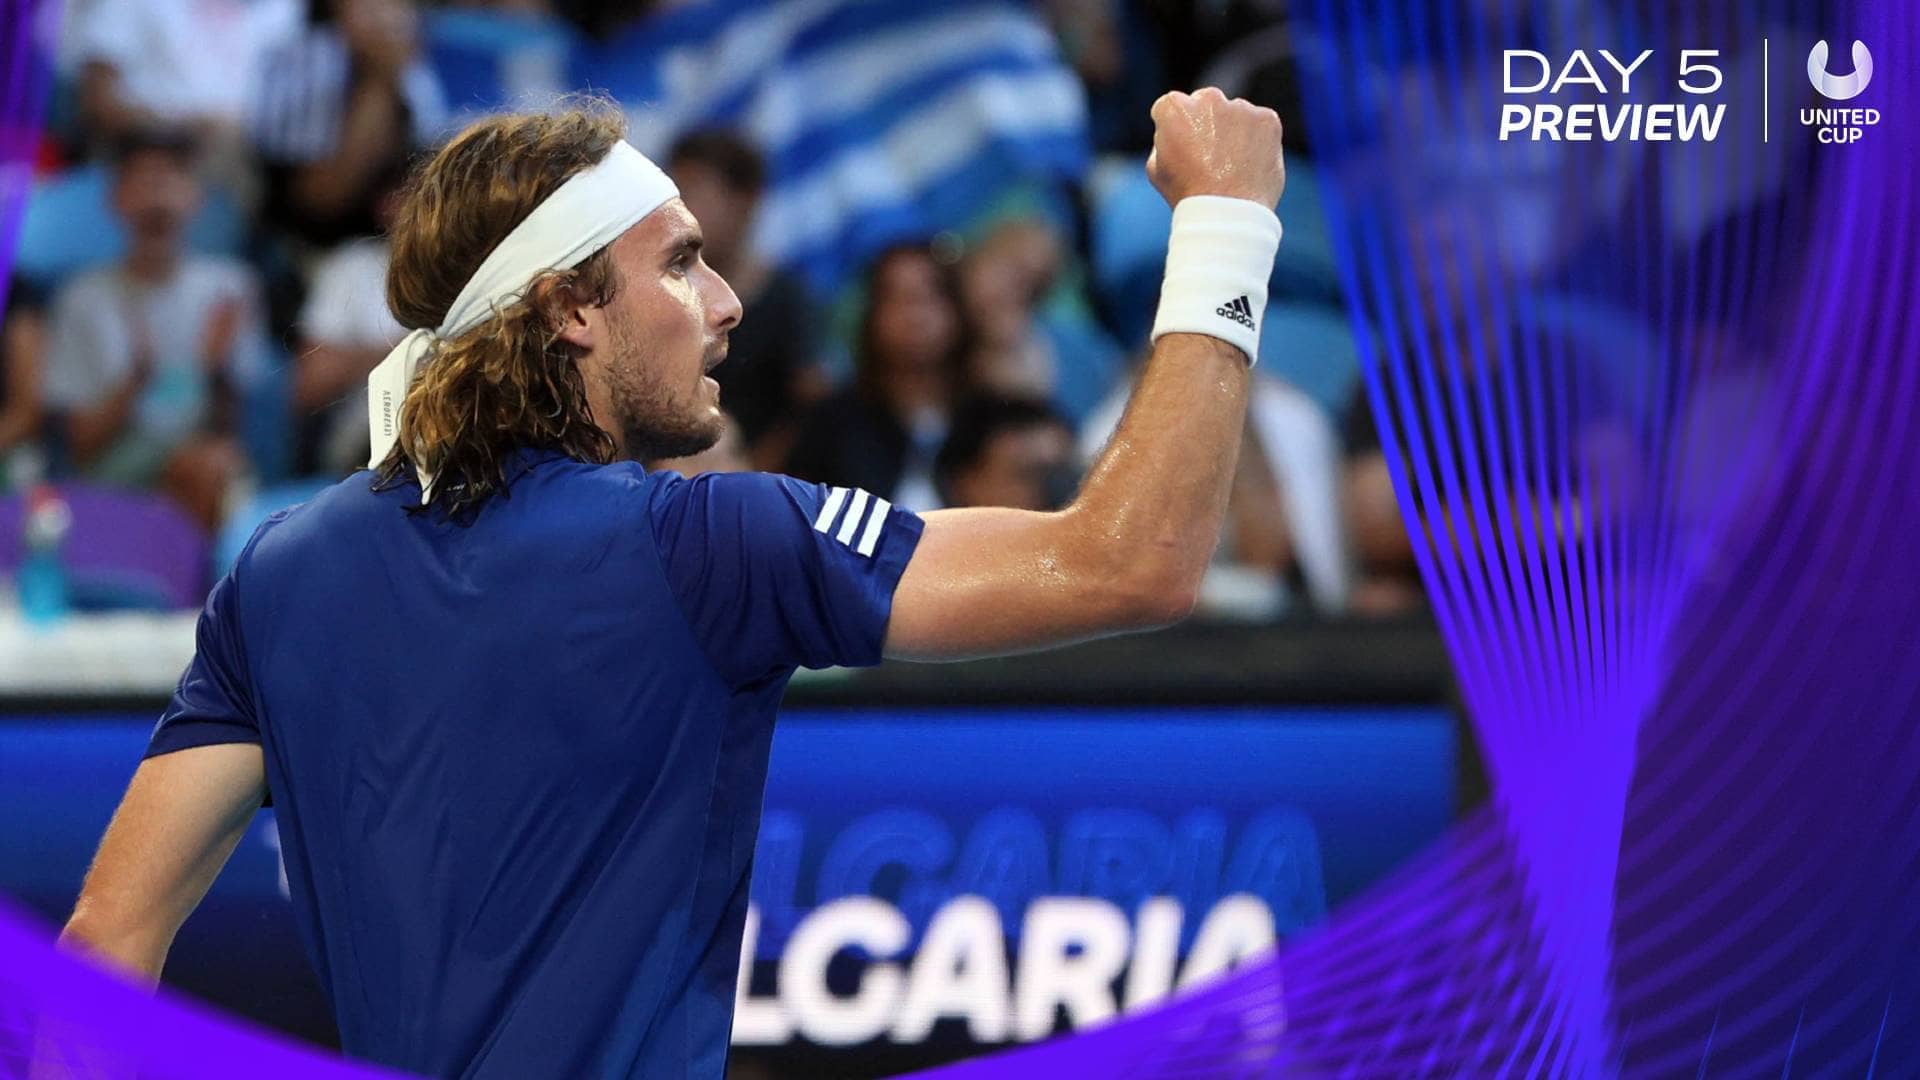 Greece's Stefanos Tsitsipas looks to stay perfect at the United Cup.